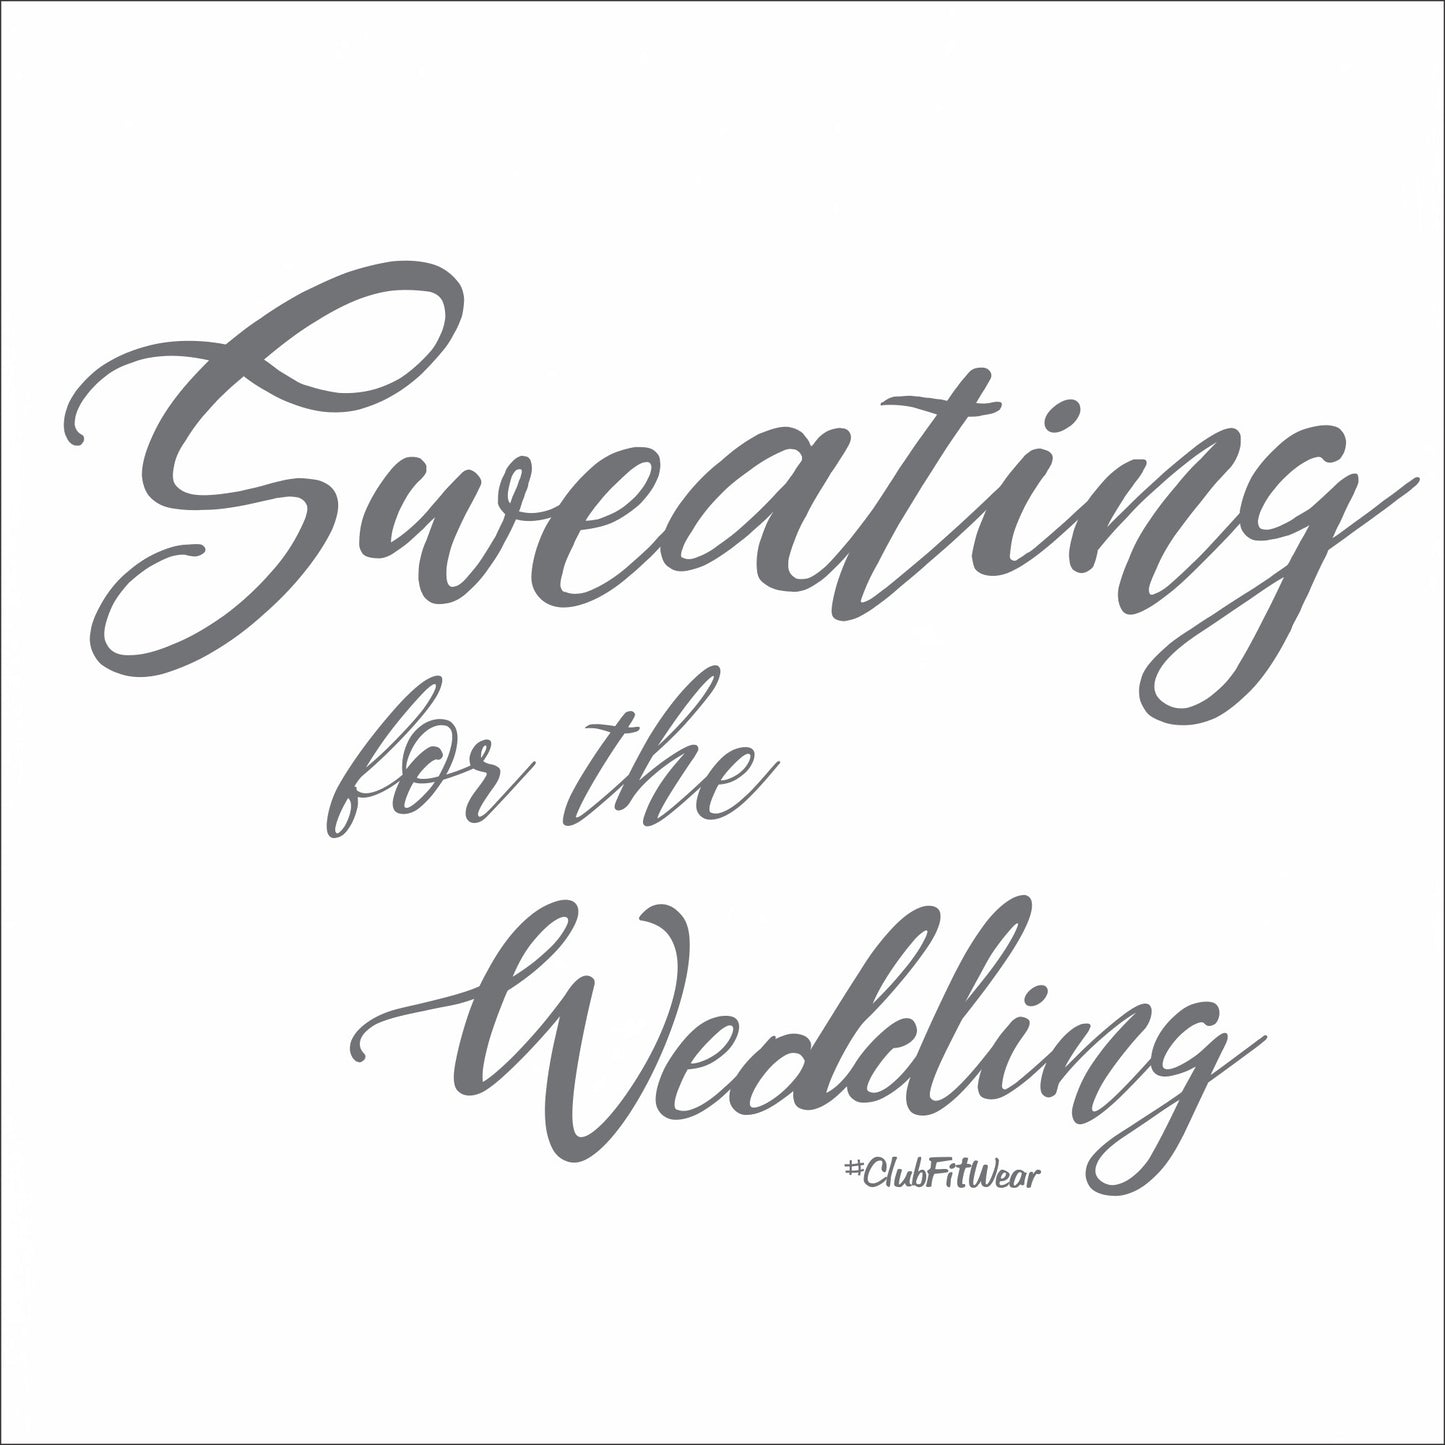 Sweating for the Wedding